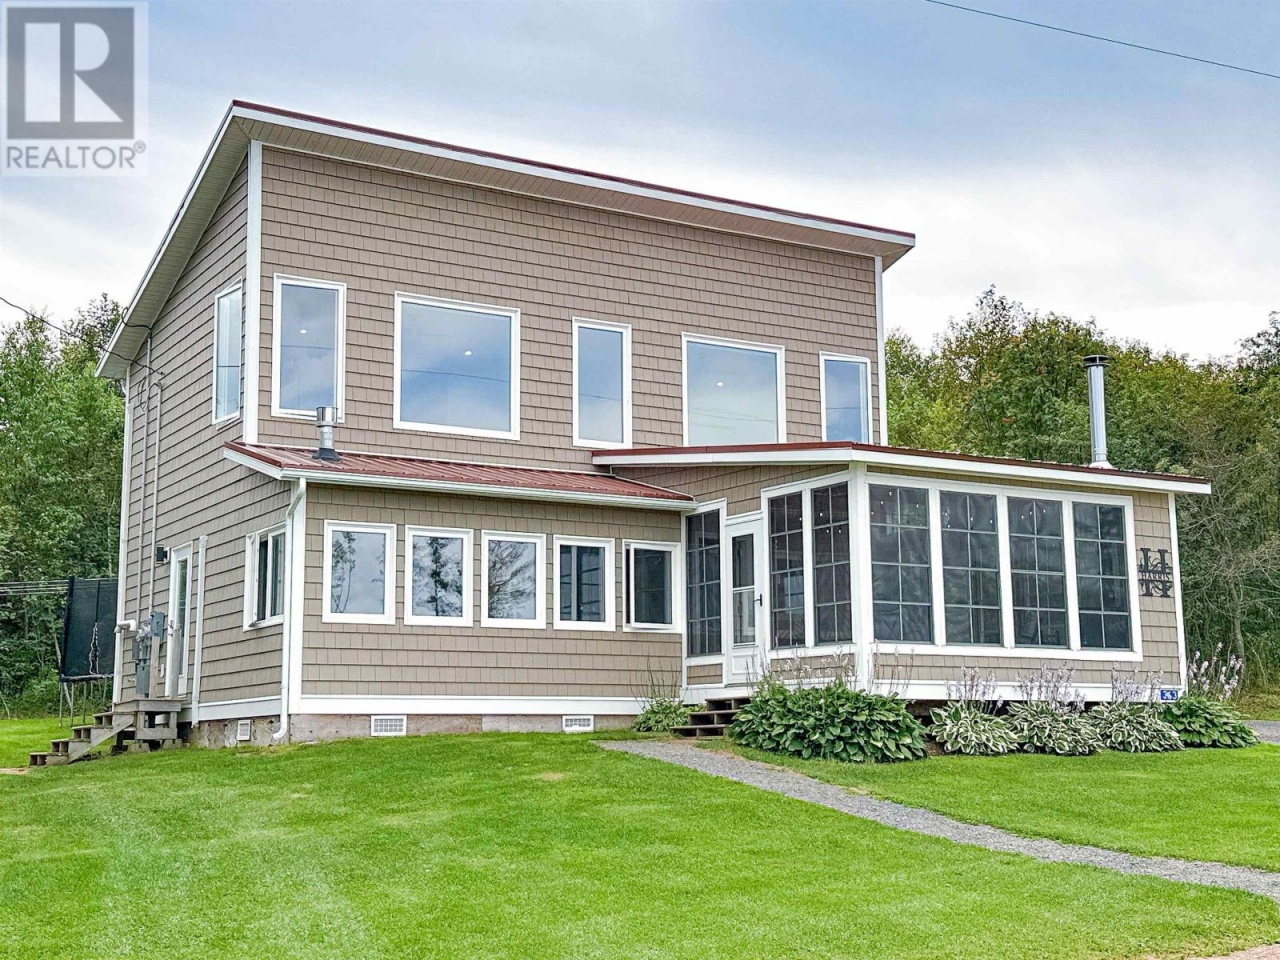 355, 359, 363, 367, 371 Morrison's Beach Road355, 359, 363, 367, 371 Morrison's Beach Road, Georgetown Royalty, Prince Edward Island C0A1L0, 4 Bedrooms Bedrooms, ,2 BathroomsBathrooms,Single Family,For Sale,355, 359, 363, 367, 371 Morrison's Beach Road,202318182